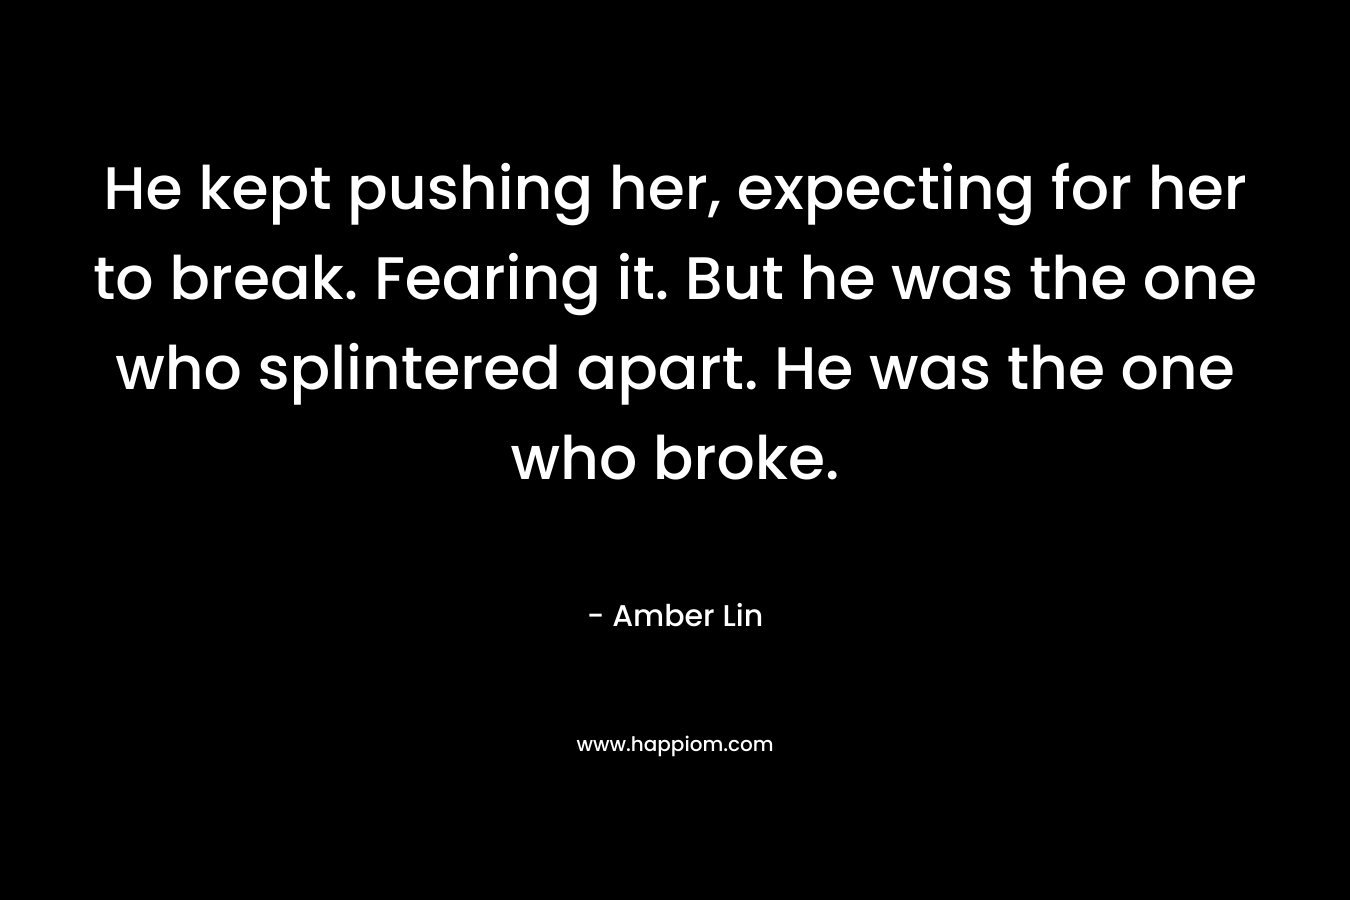 He kept pushing her, expecting for her to break. Fearing it. But he was the one who splintered apart. He was the one who broke.